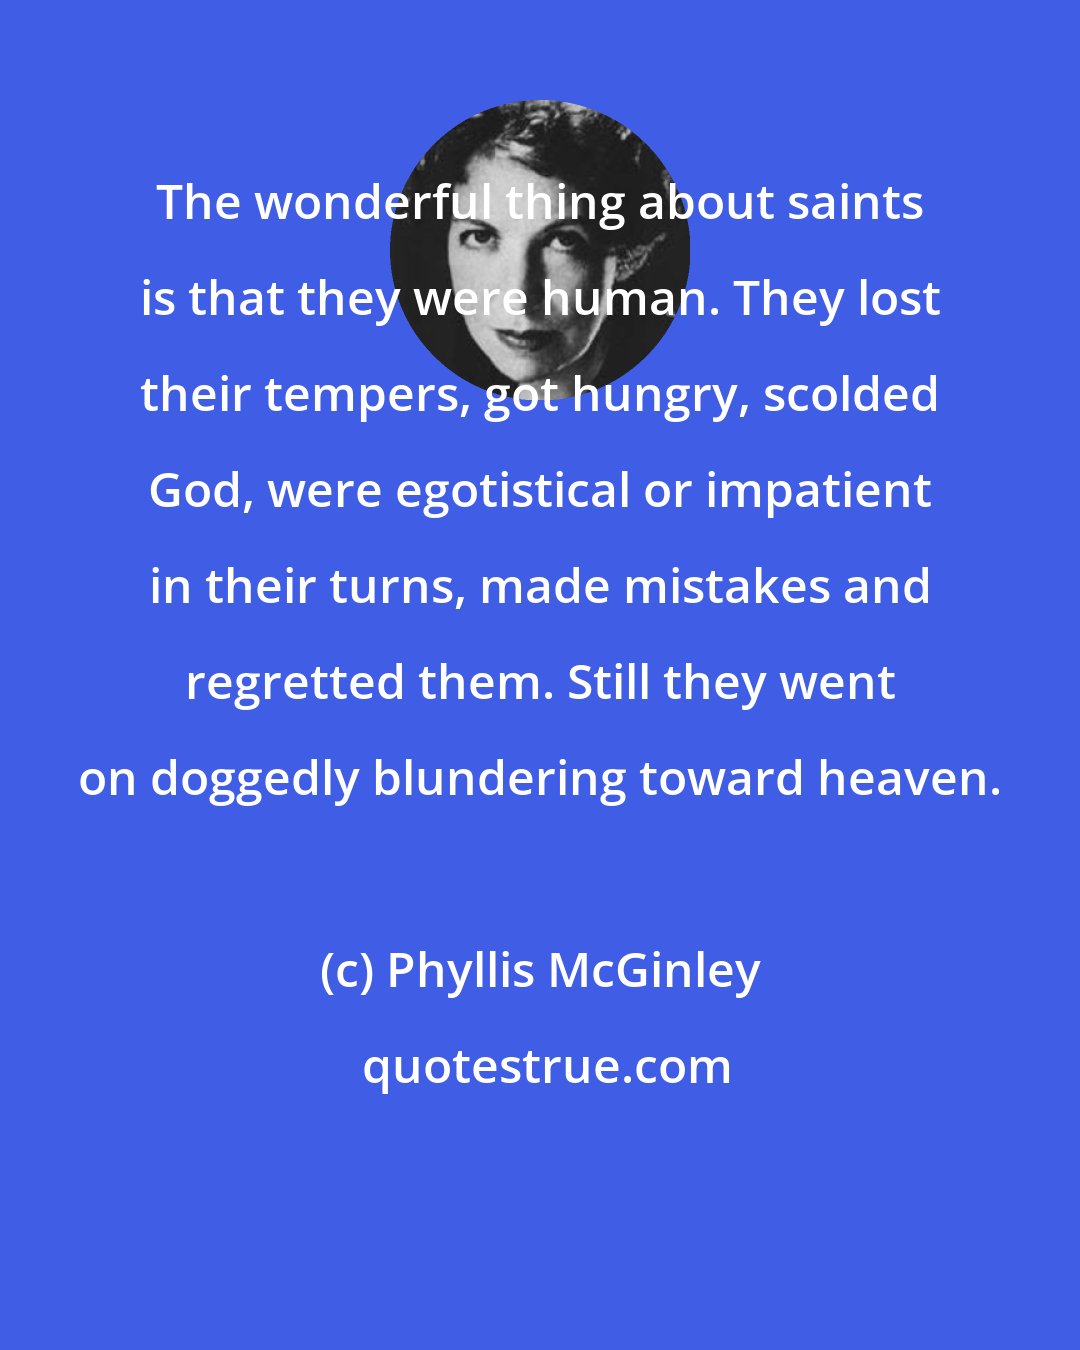 Phyllis McGinley: The wonderful thing about saints is that they were human. They lost their tempers, got hungry, scolded God, were egotistical or impatient in their turns, made mistakes and regretted them. Still they went on doggedly blundering toward heaven.